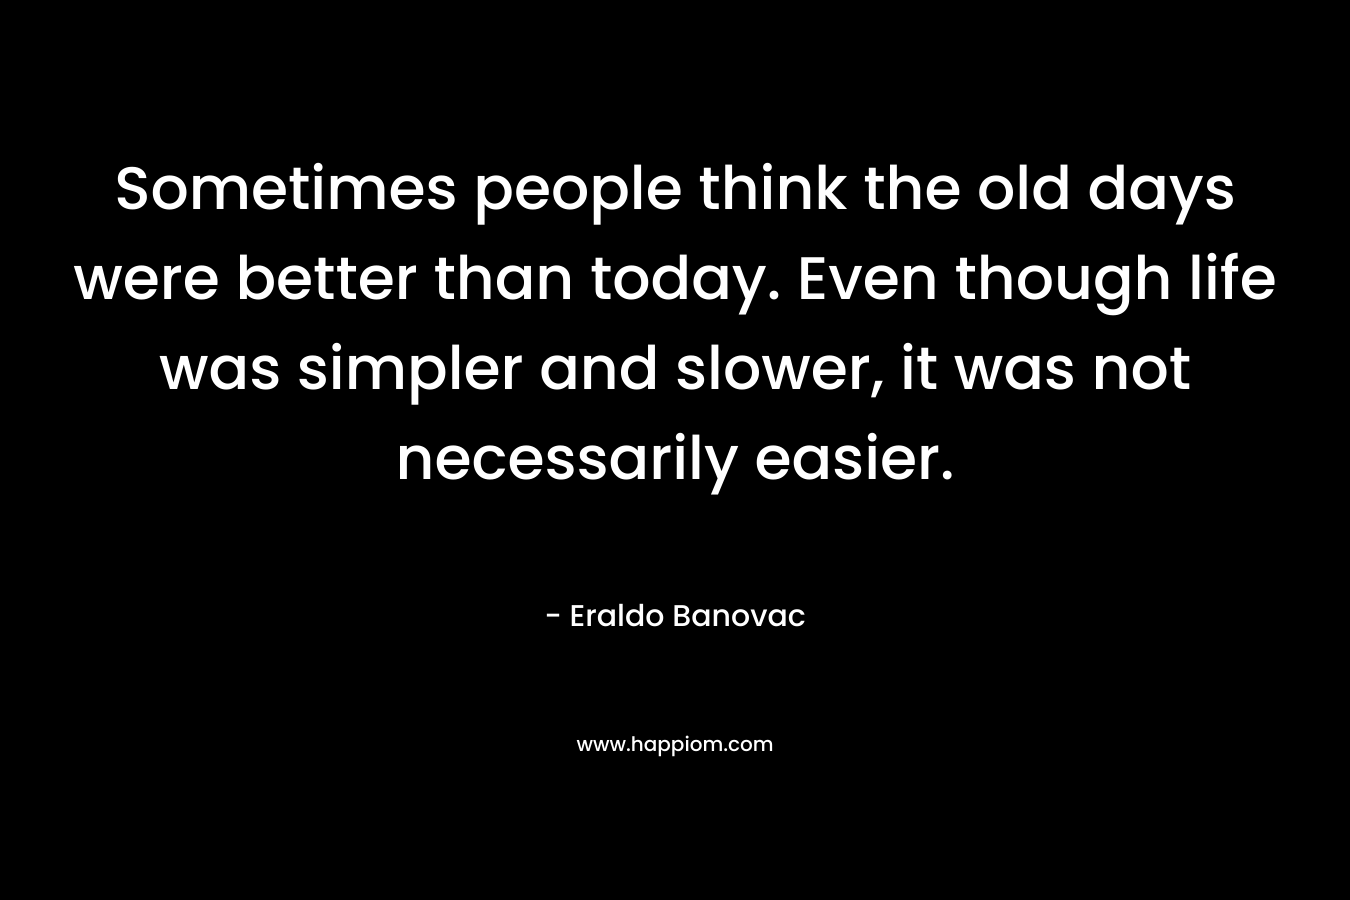 Sometimes people think the old days were better than today. Even though life was simpler and slower, it was not necessarily easier.